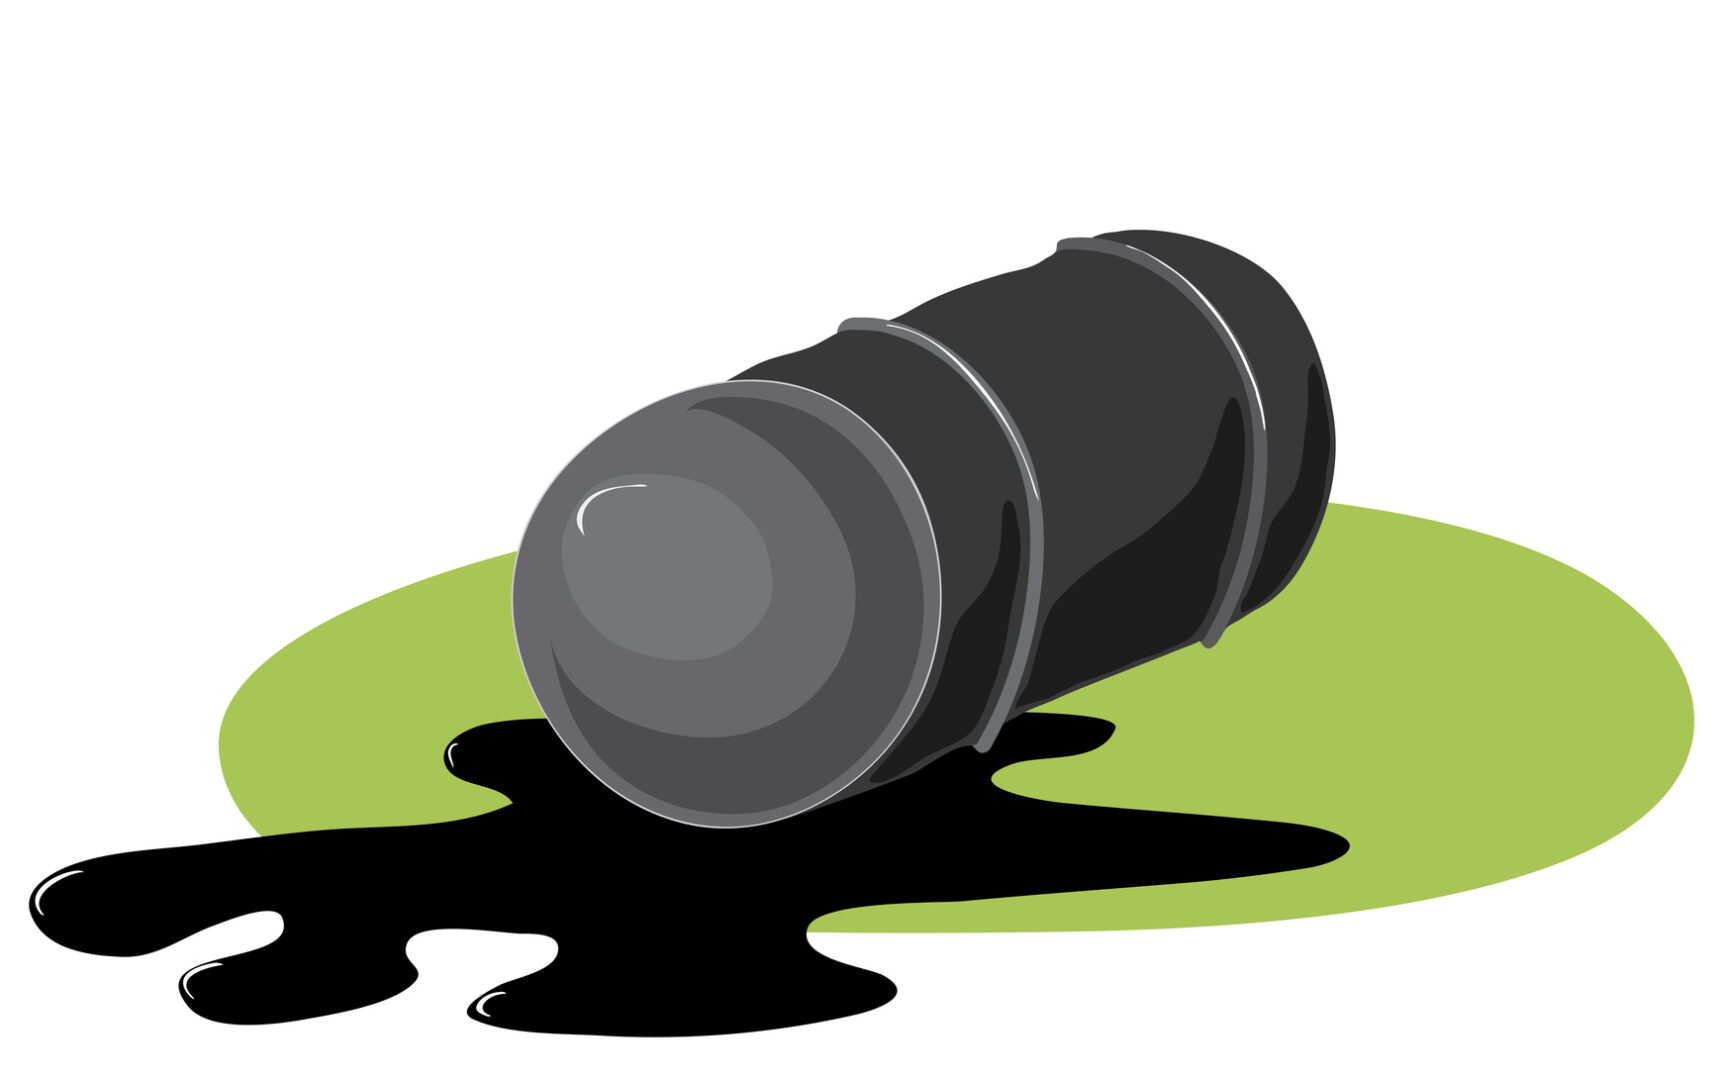 a cartoon image of leaky fuel tank